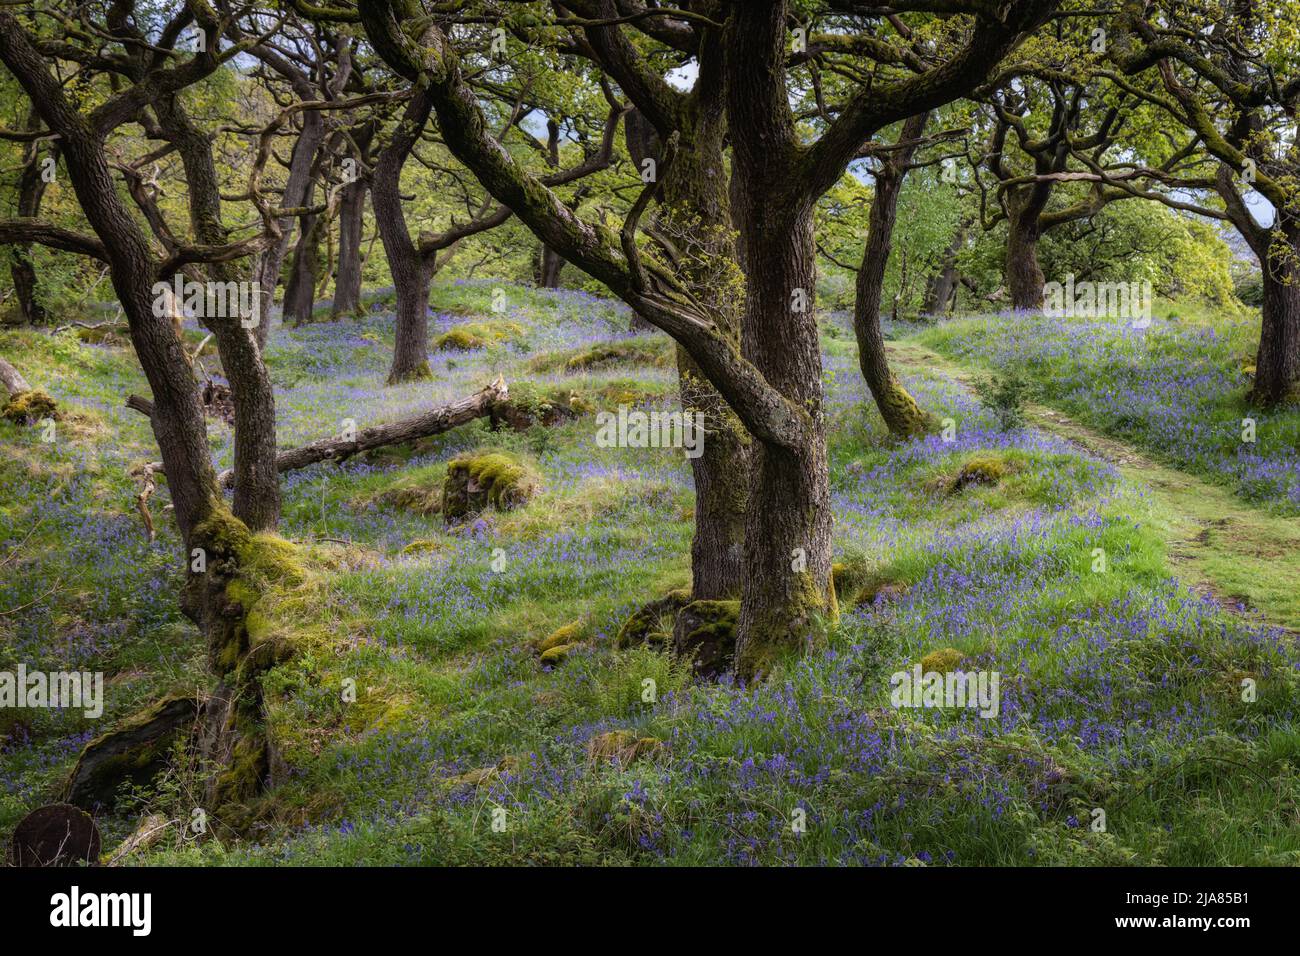 Bluebells and oak trees in a mossy woodland on the Ingleton Waterfalls Trail in the Yorkshire Dales, England, Uk Stock Photo